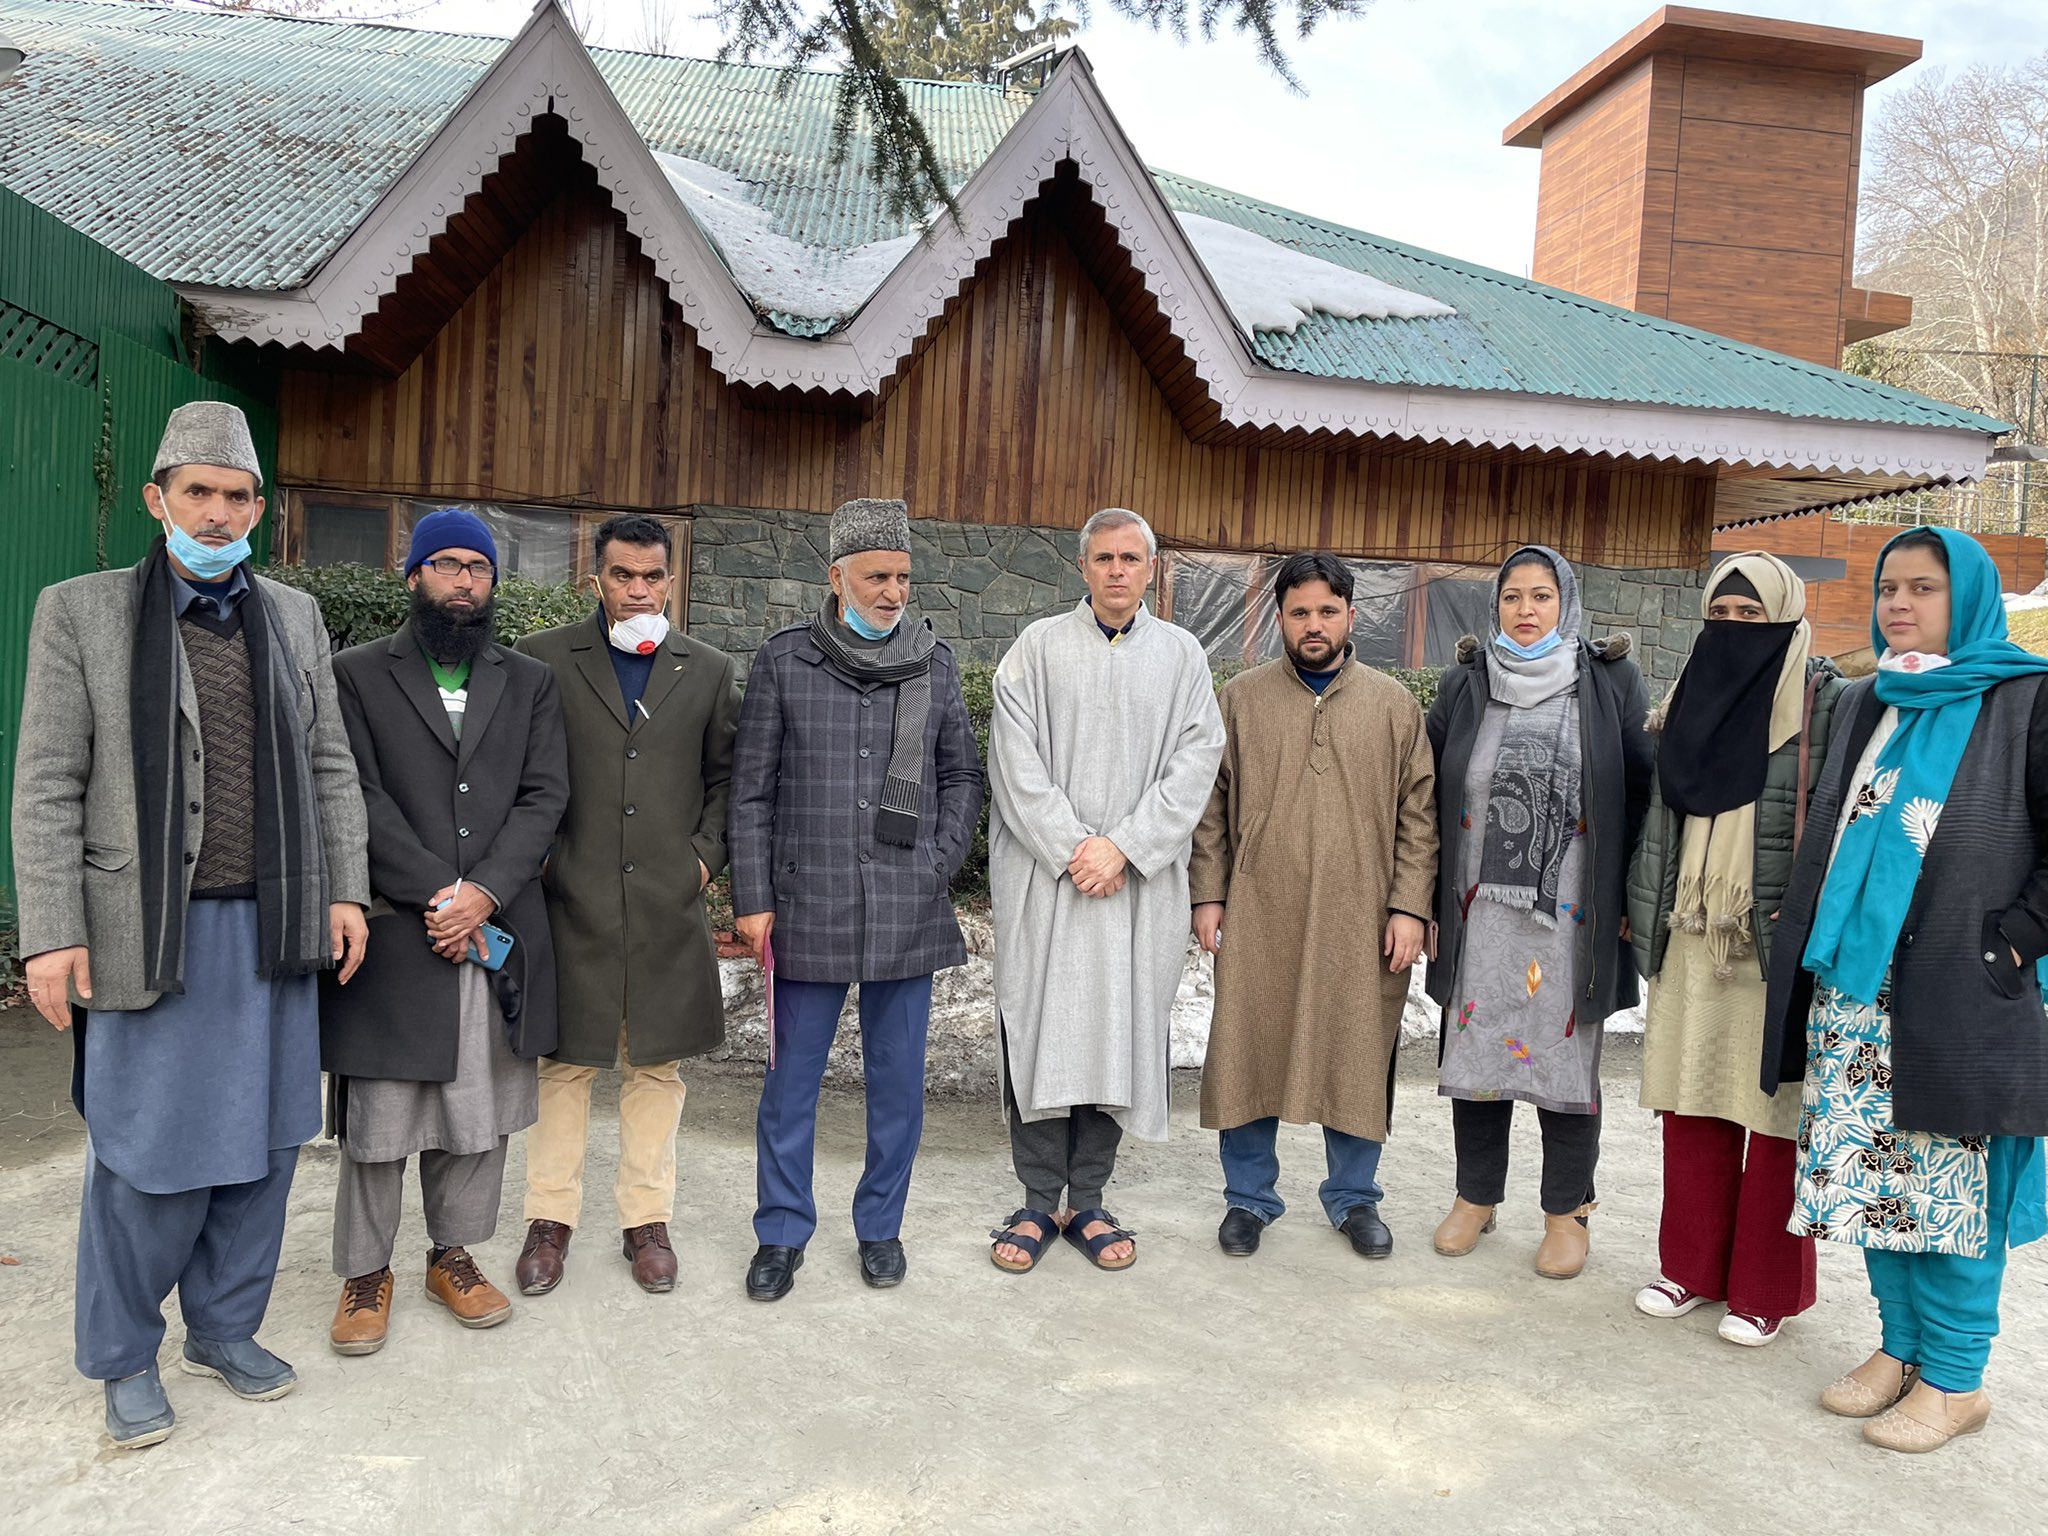 “Naya/new J&K” after Aug 2019: Omar Abdullah claims he, his father and other family members put under house arrest